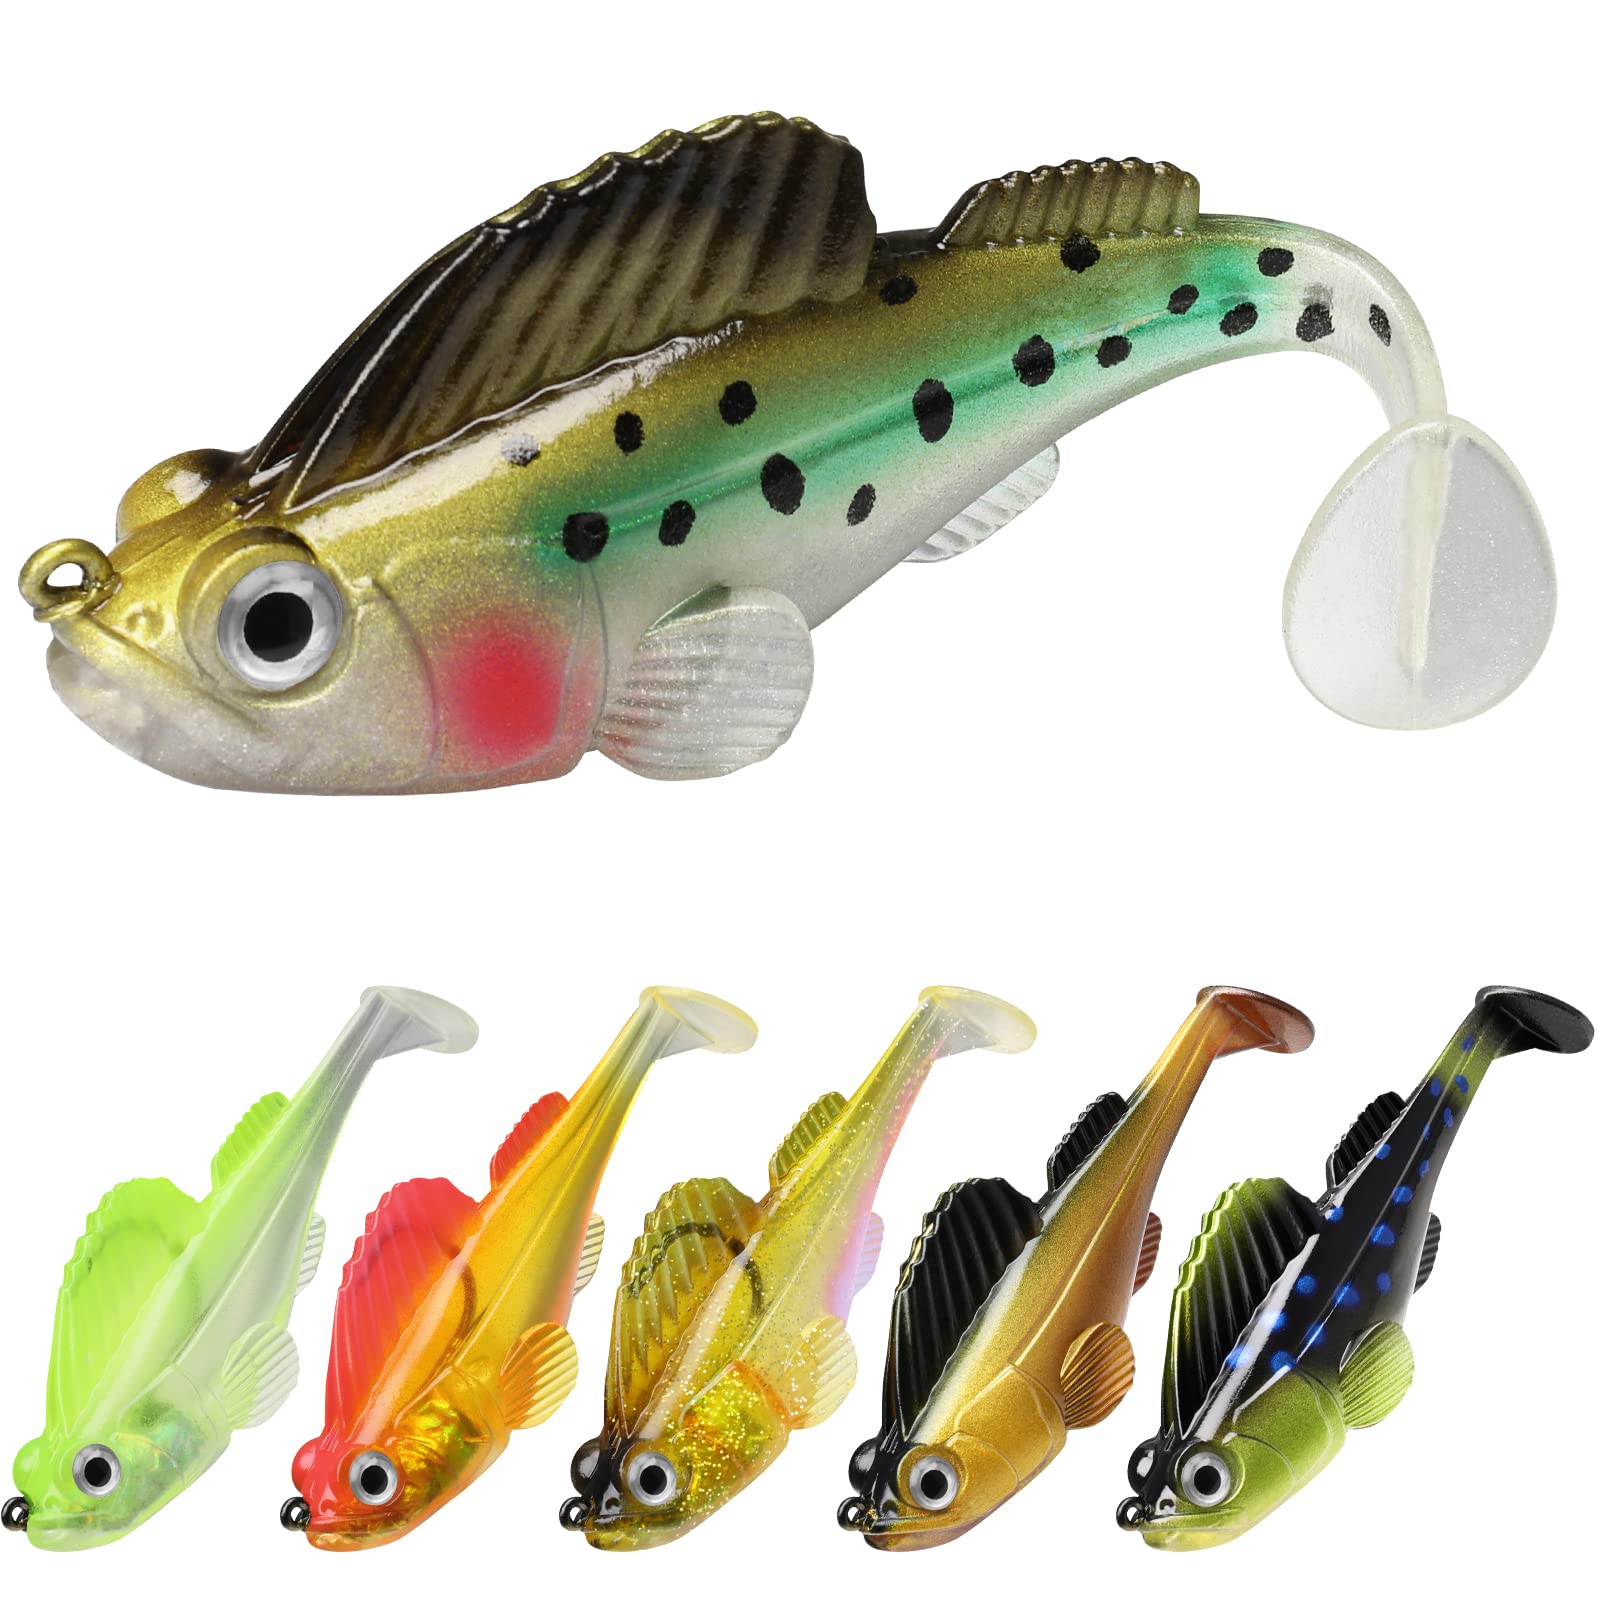 Bass Fishing Lure, Soft Tail Lure With 2 Hooks For Saltwater